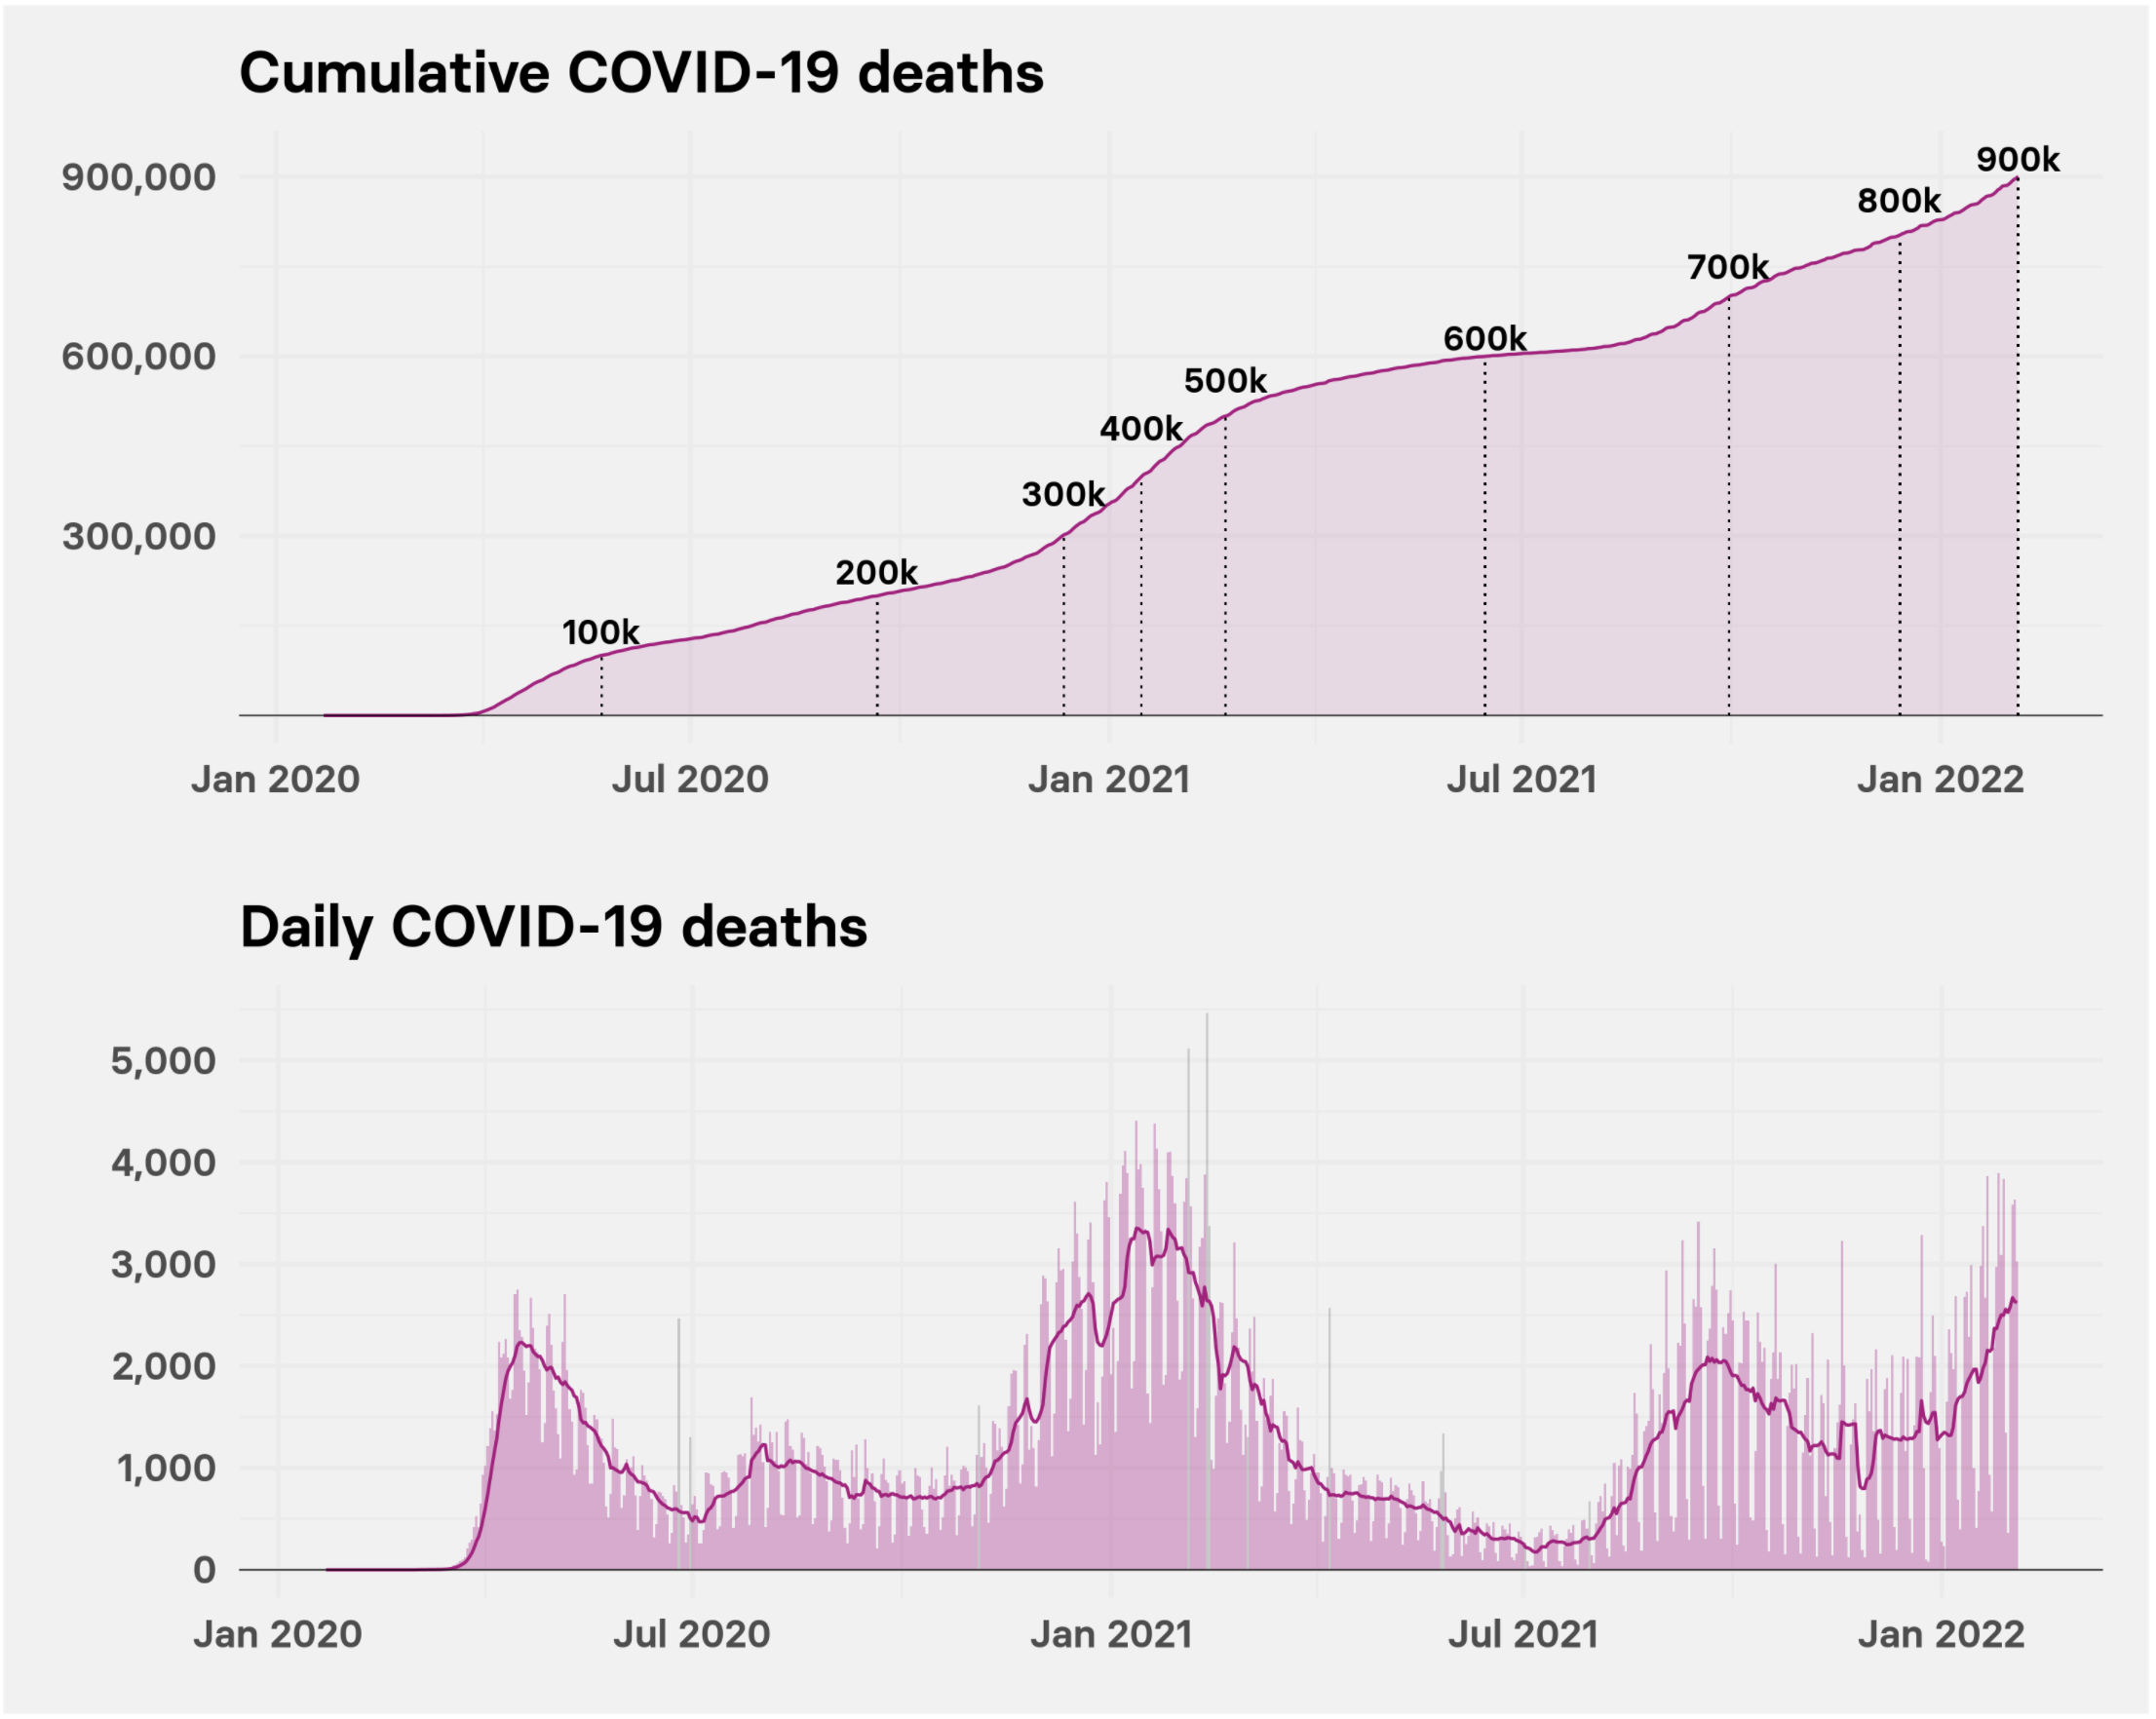 Two charts show daily and cumulative deaths from COVID from 2020 to 2022